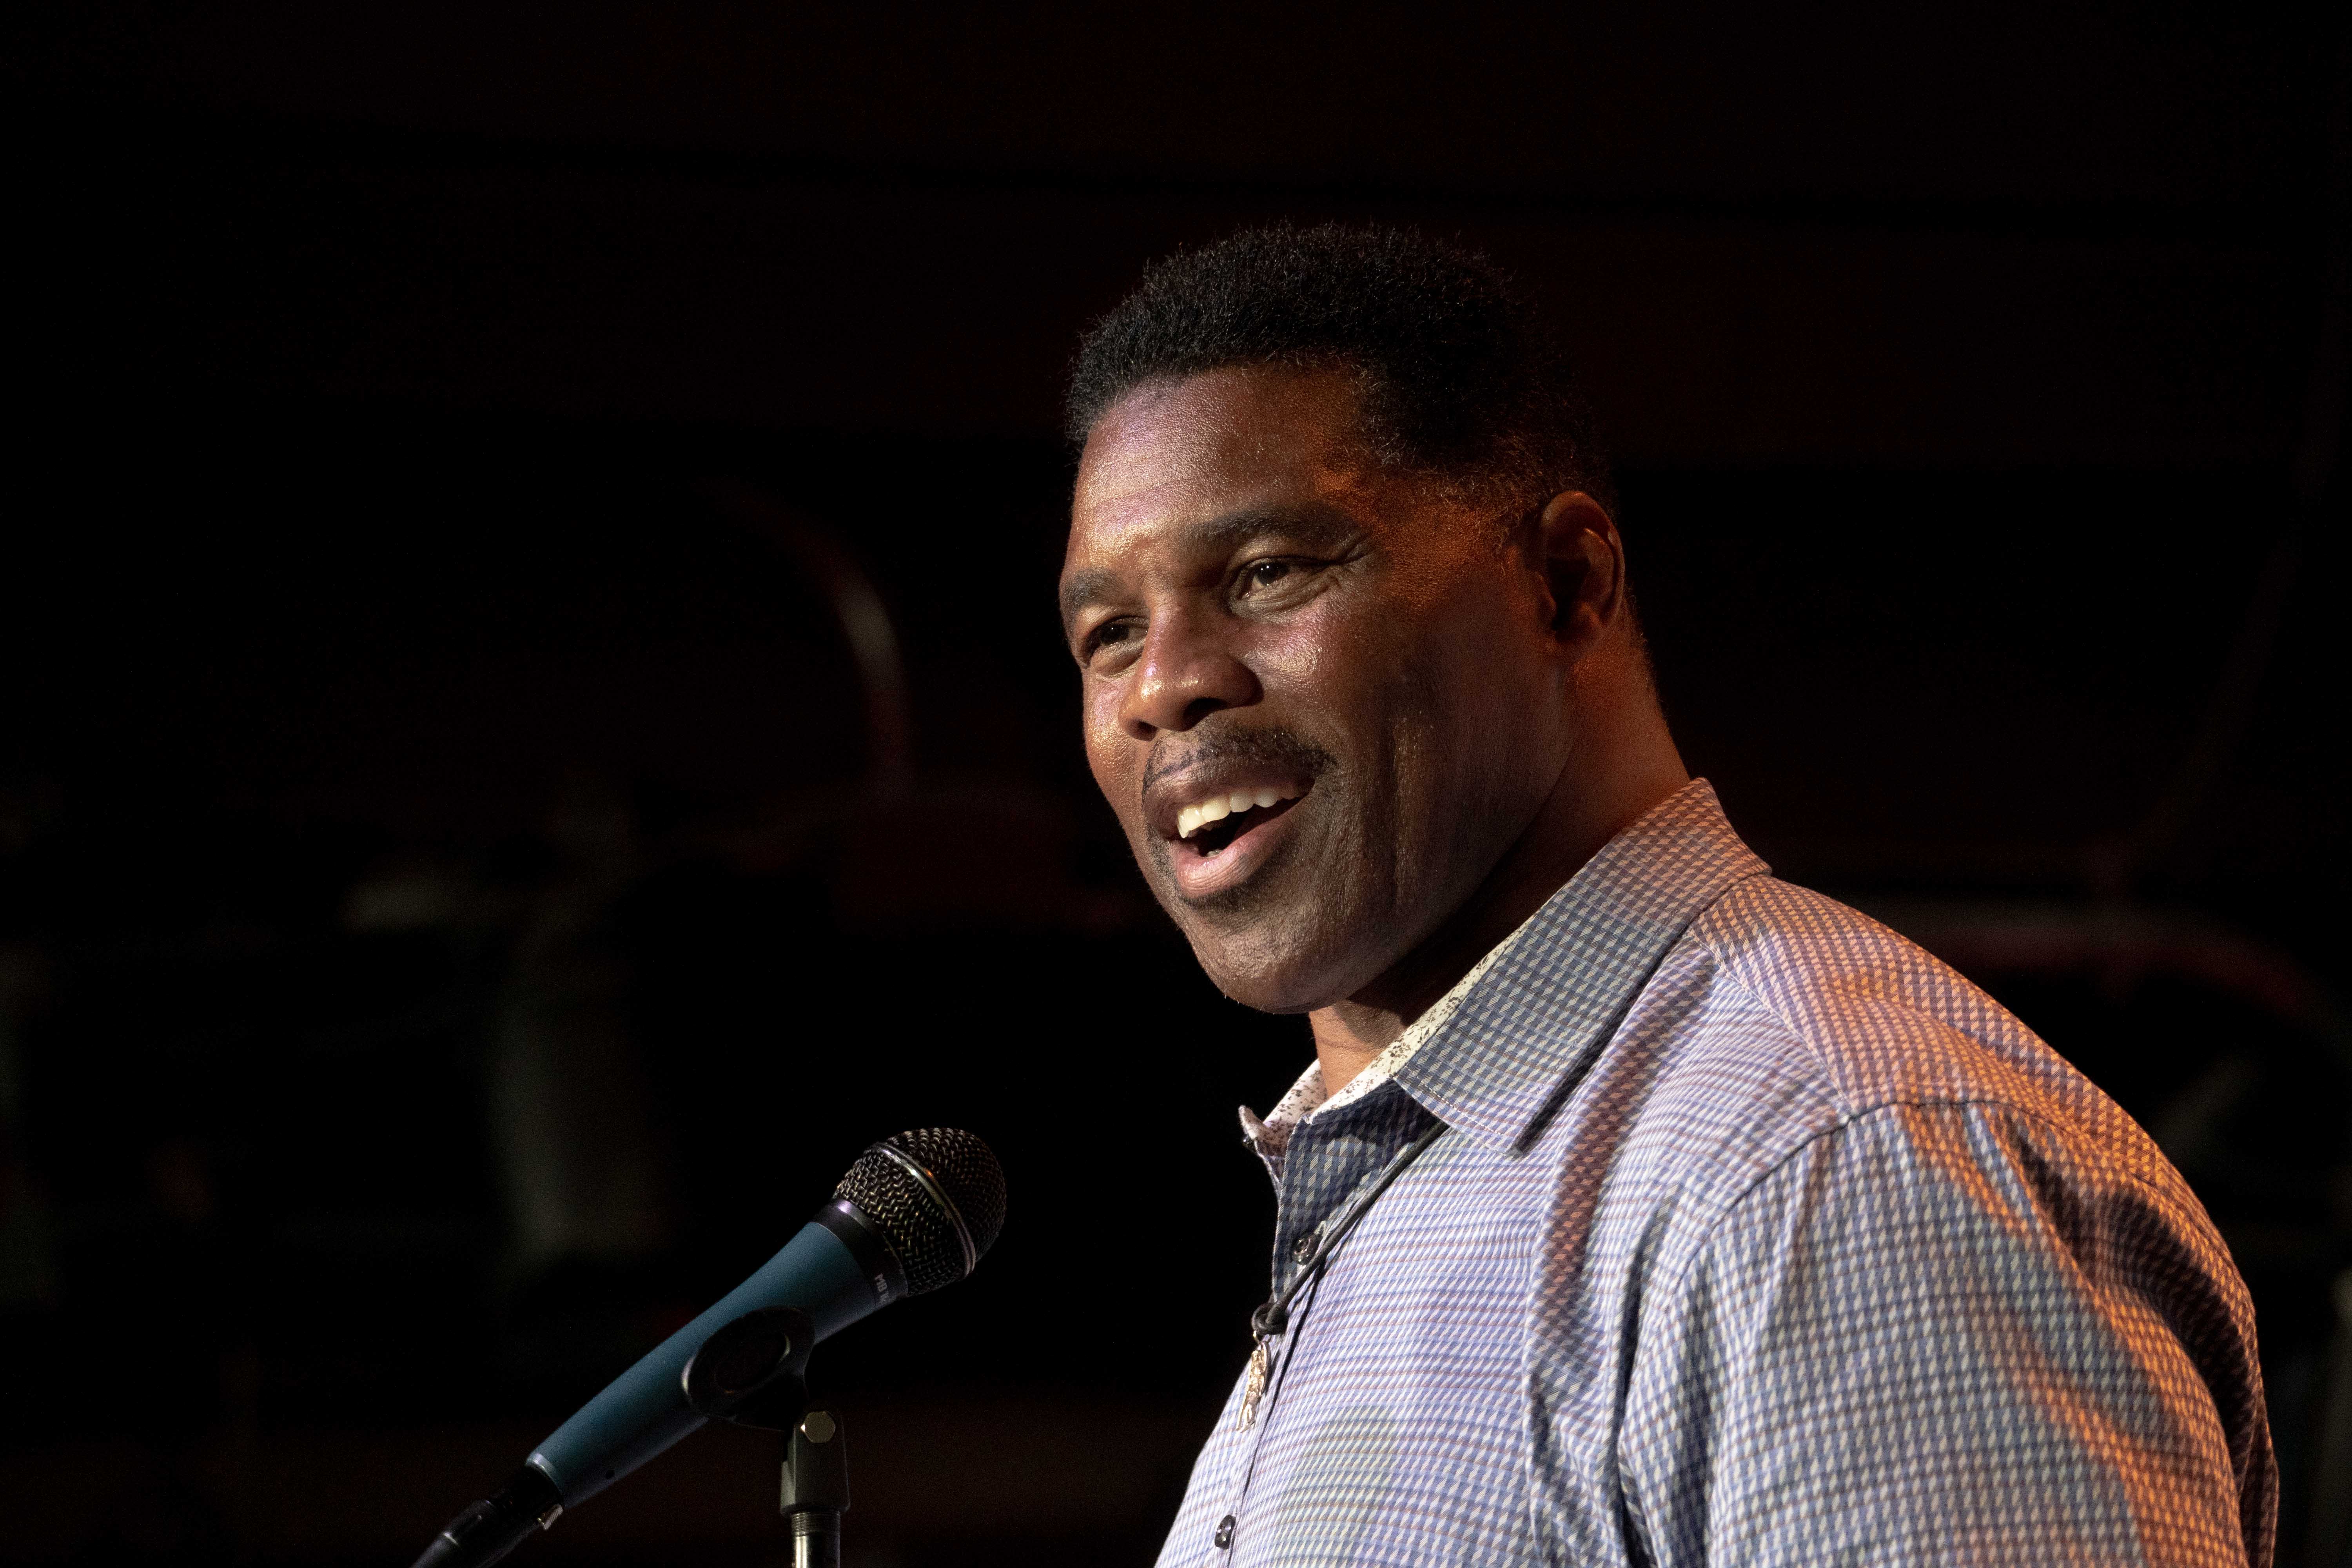 Herschel Walker speaks at a May 23, 2022 rally in Athens, Georgia. | Image: AmoDays